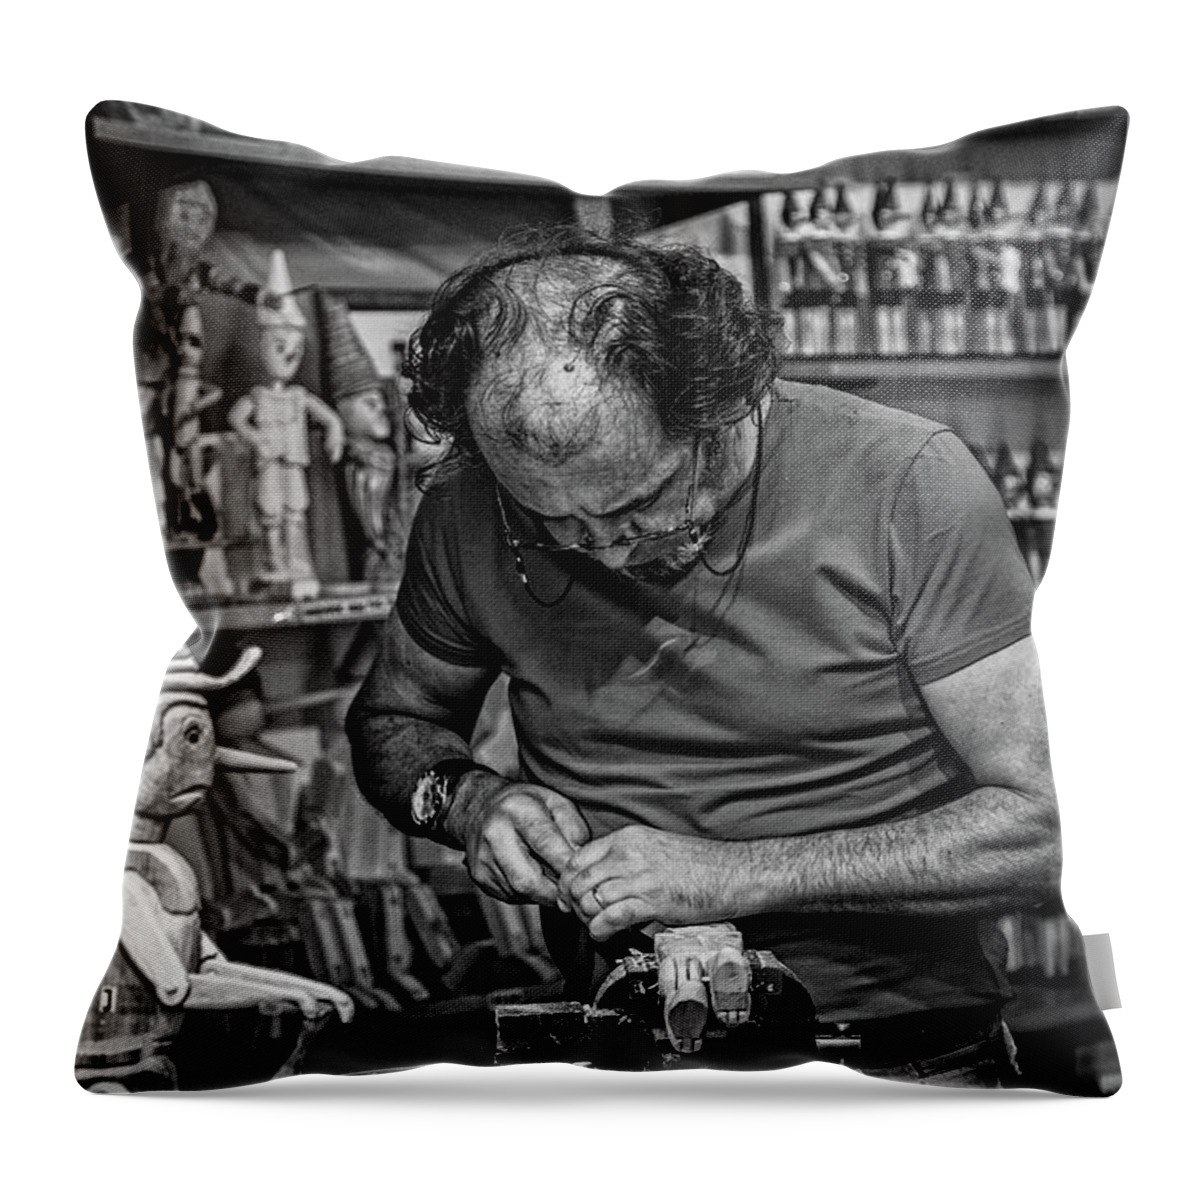 B&w Throw Pillow featuring the photograph Geppetto by Mike Schaffner